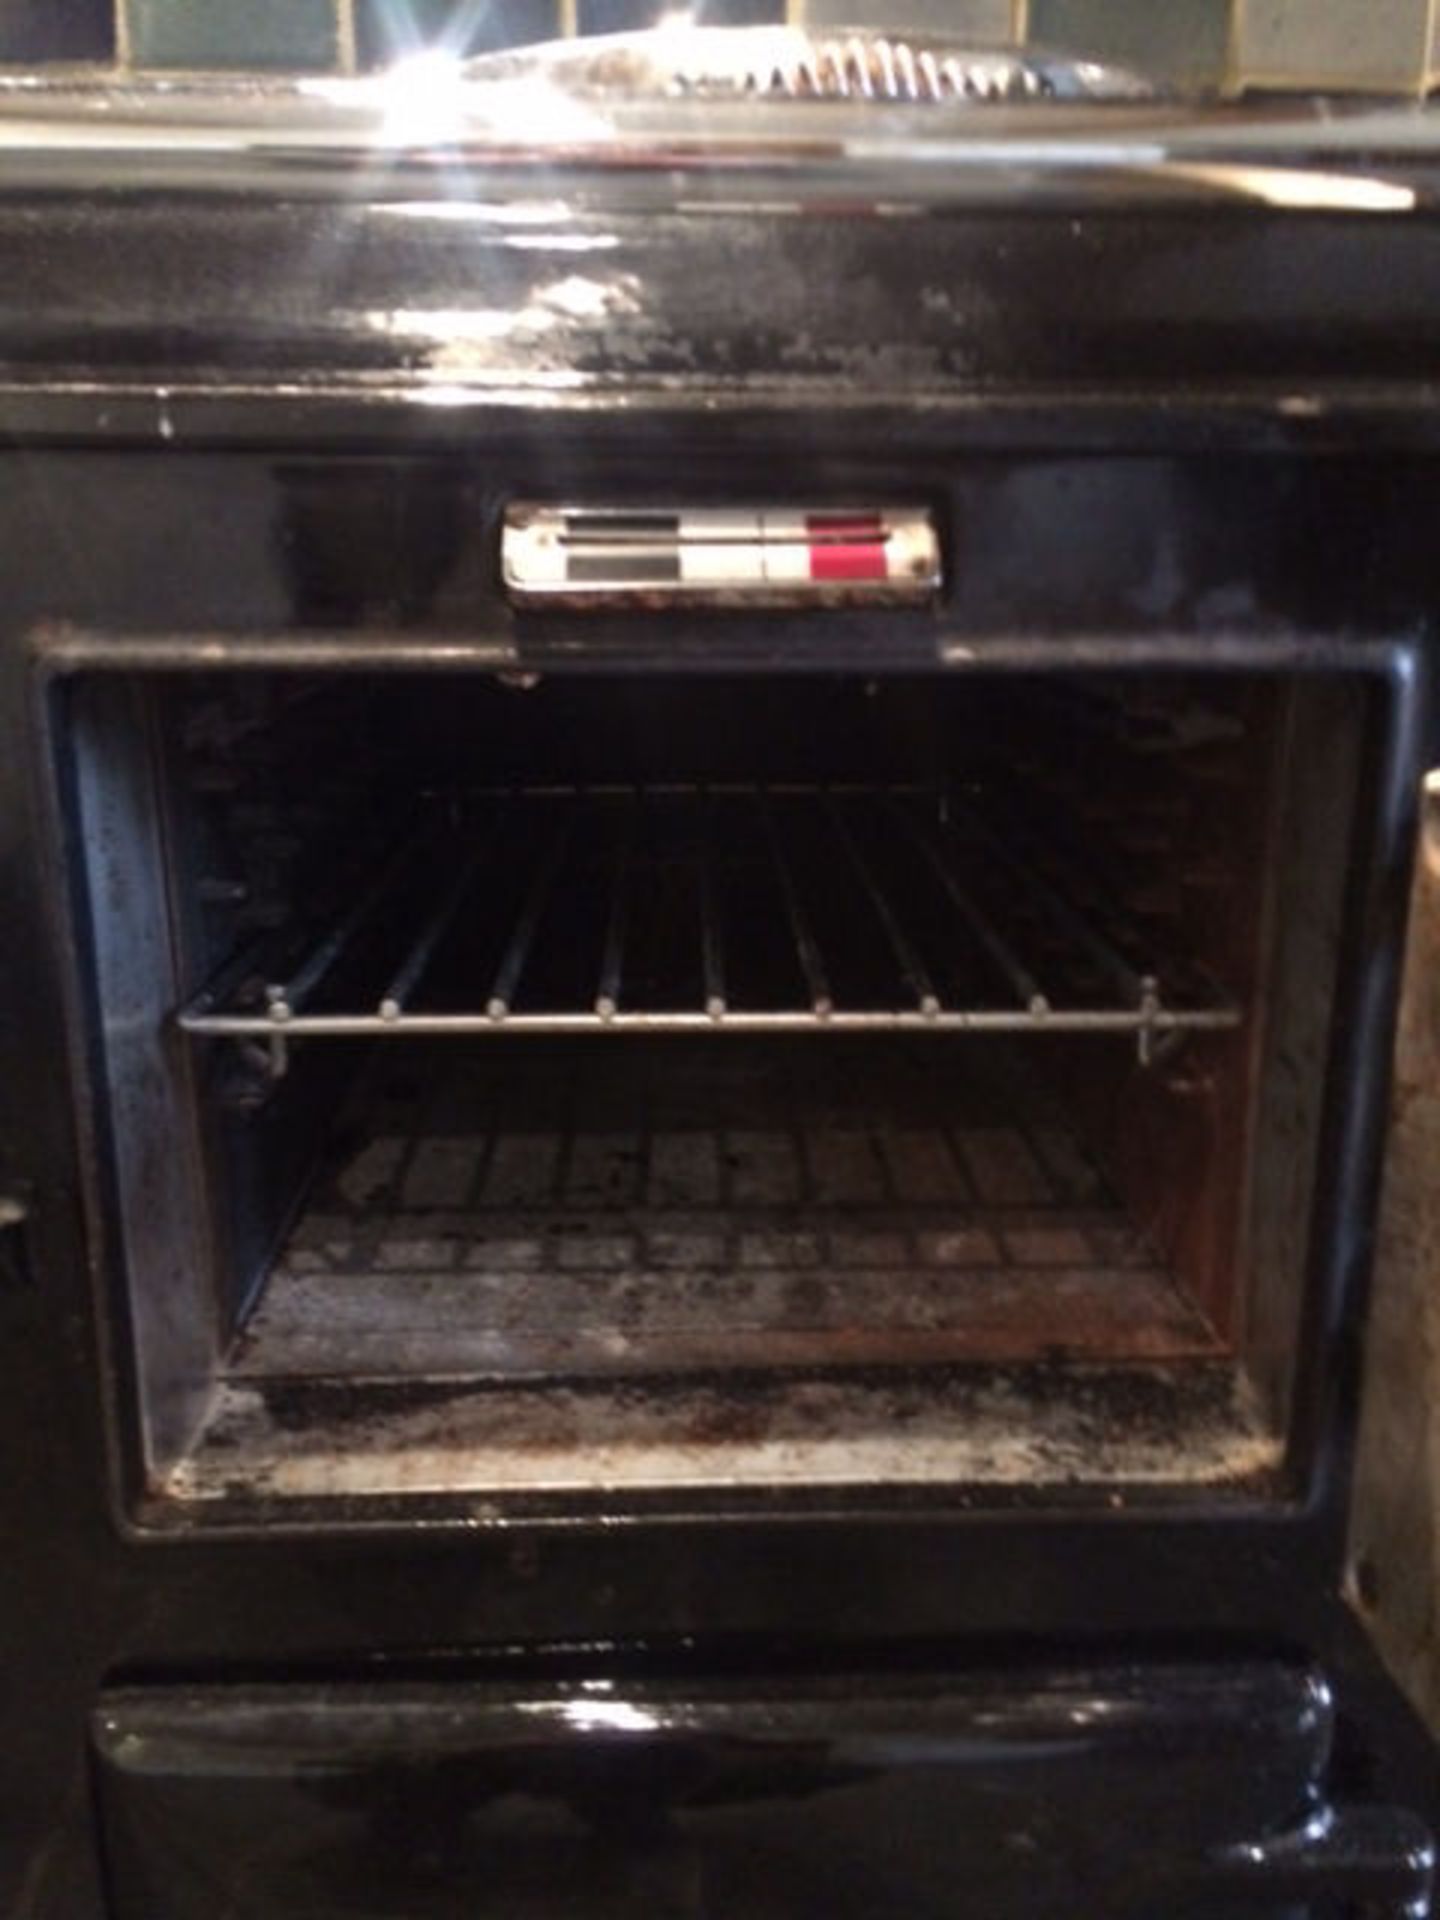 1 x Aga 2-Oven Gas Range Cooker - Cast Iron With Black Enamel Finish - Preowned - NO VAT - Image 4 of 10